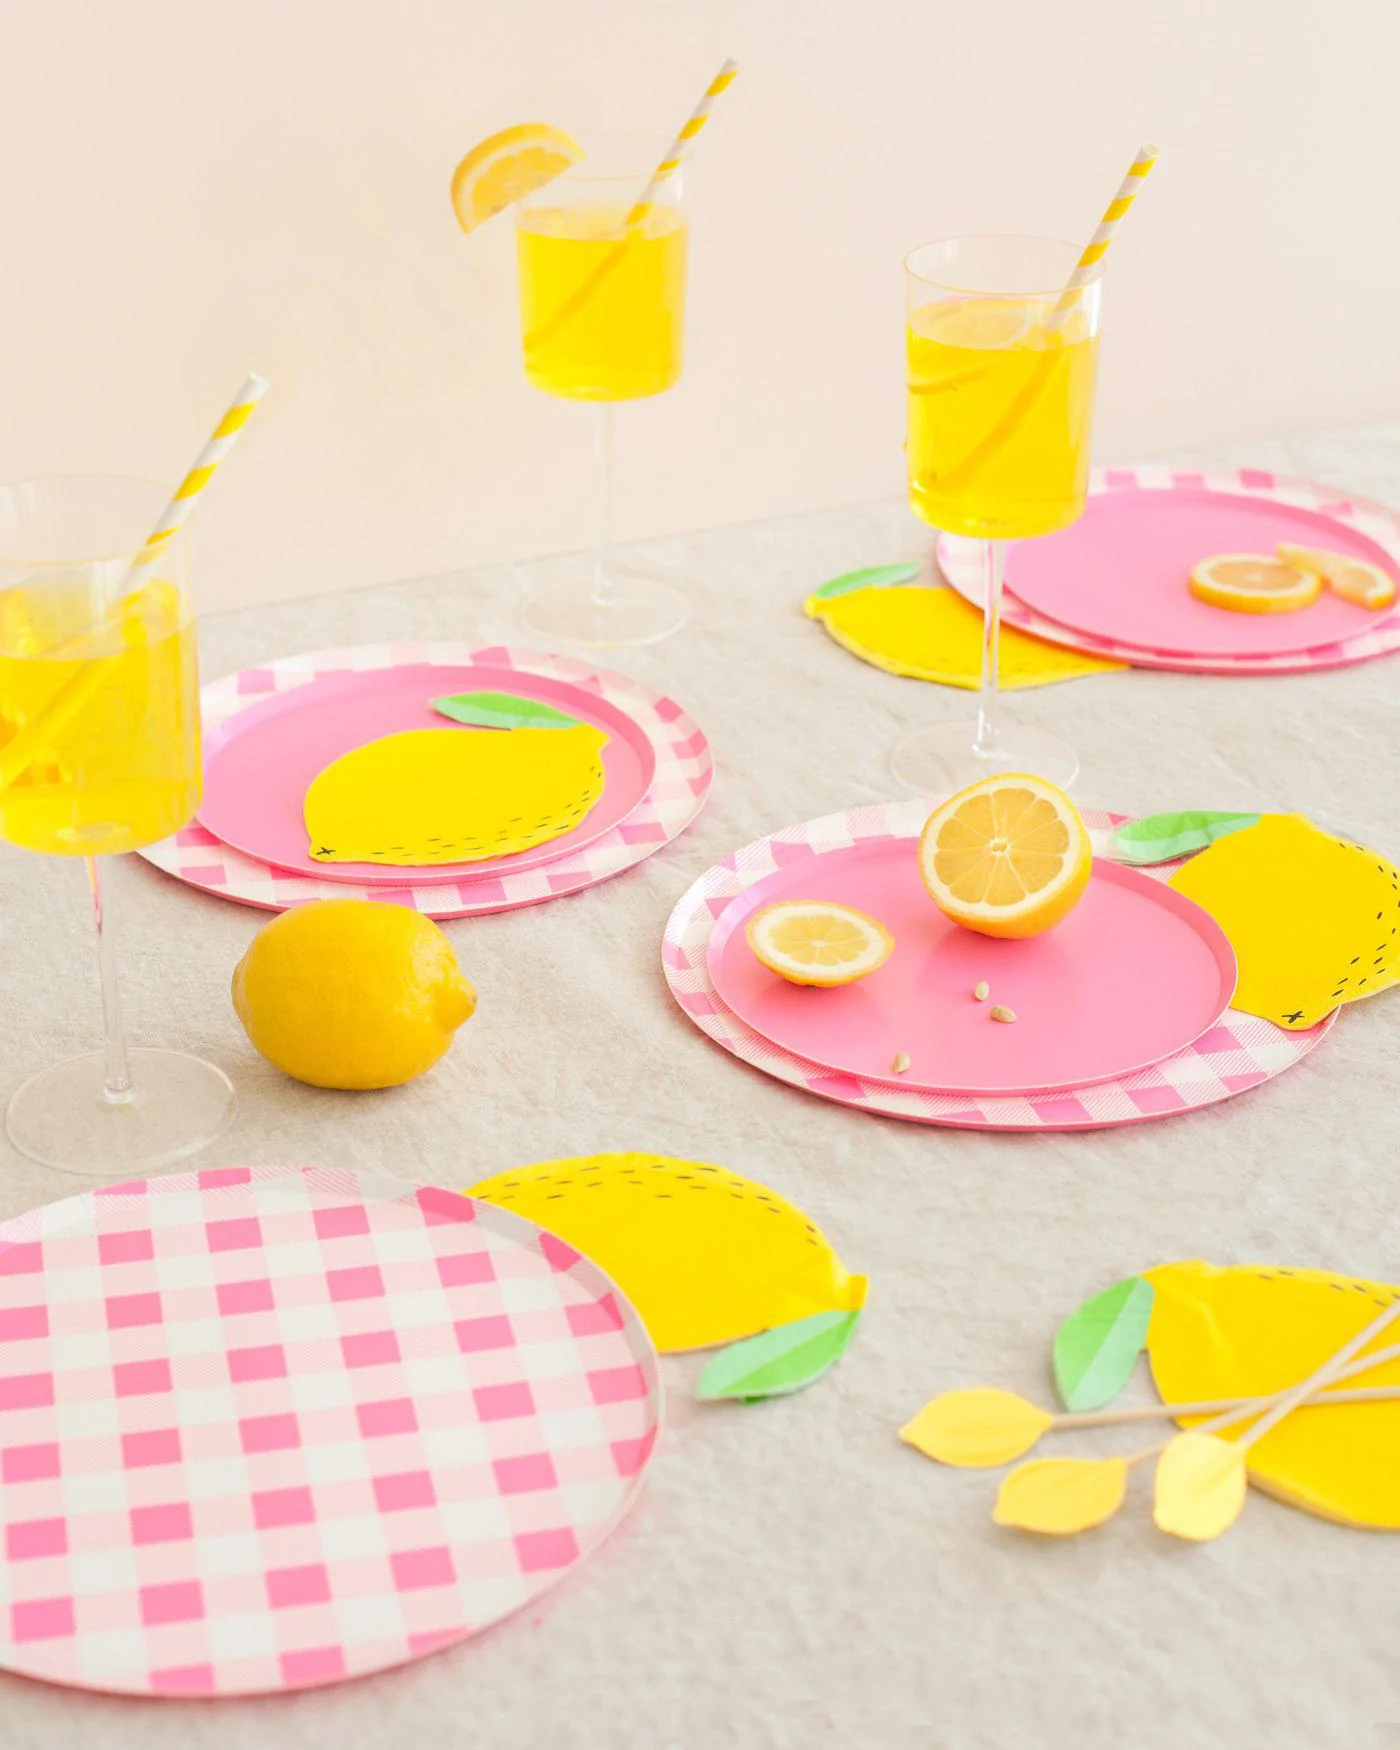 Oh Happy Day Party Shop Small Low Rim Plates: Neon Rose